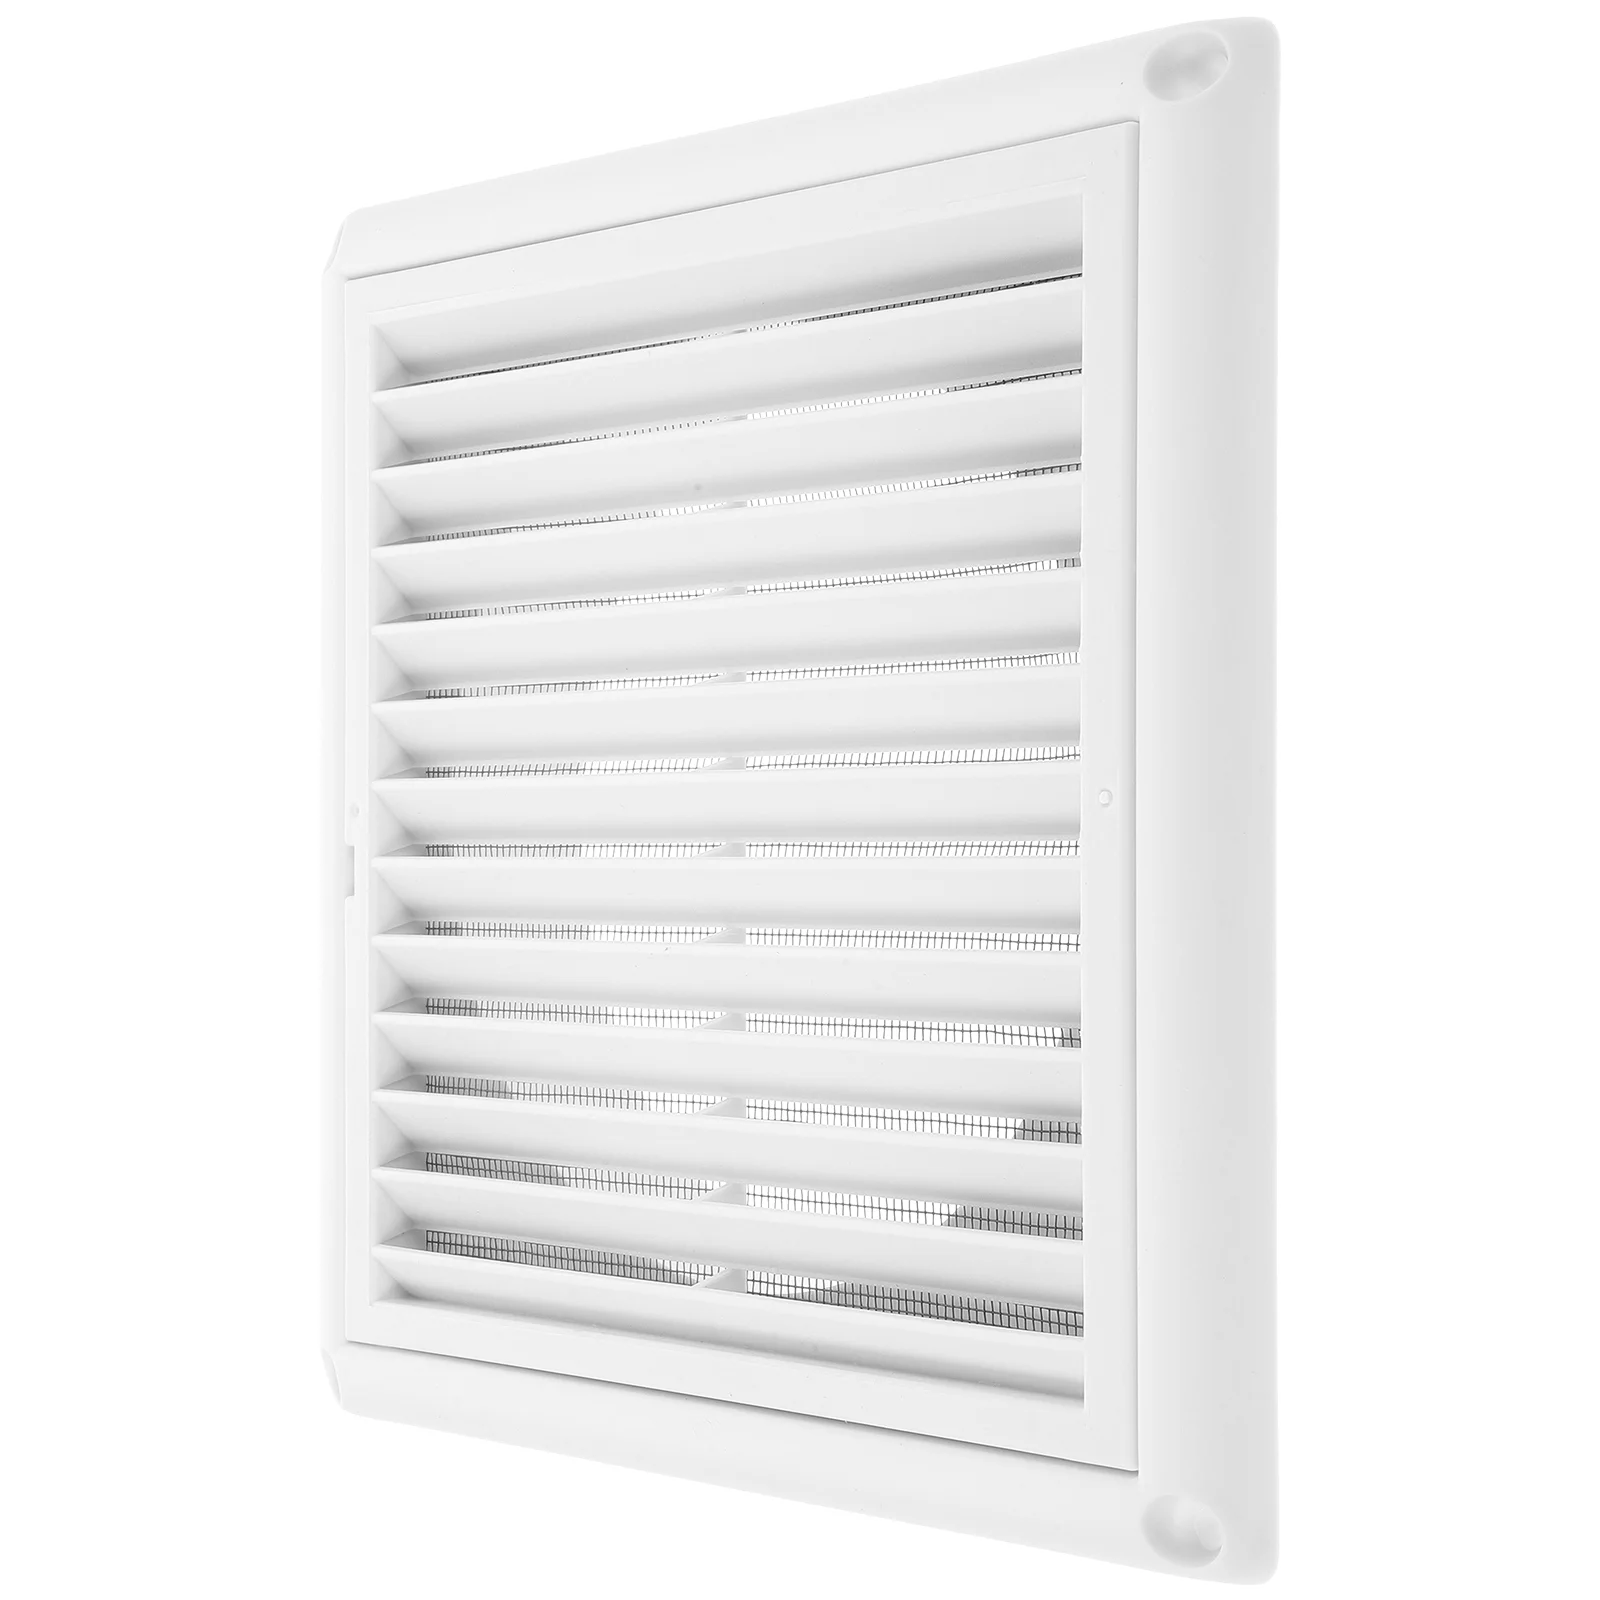 

Grill Ventilation Air Conditioner Outlet Adjustable Vent Cover Floor Bathroom Grille Return Wall Ceiling